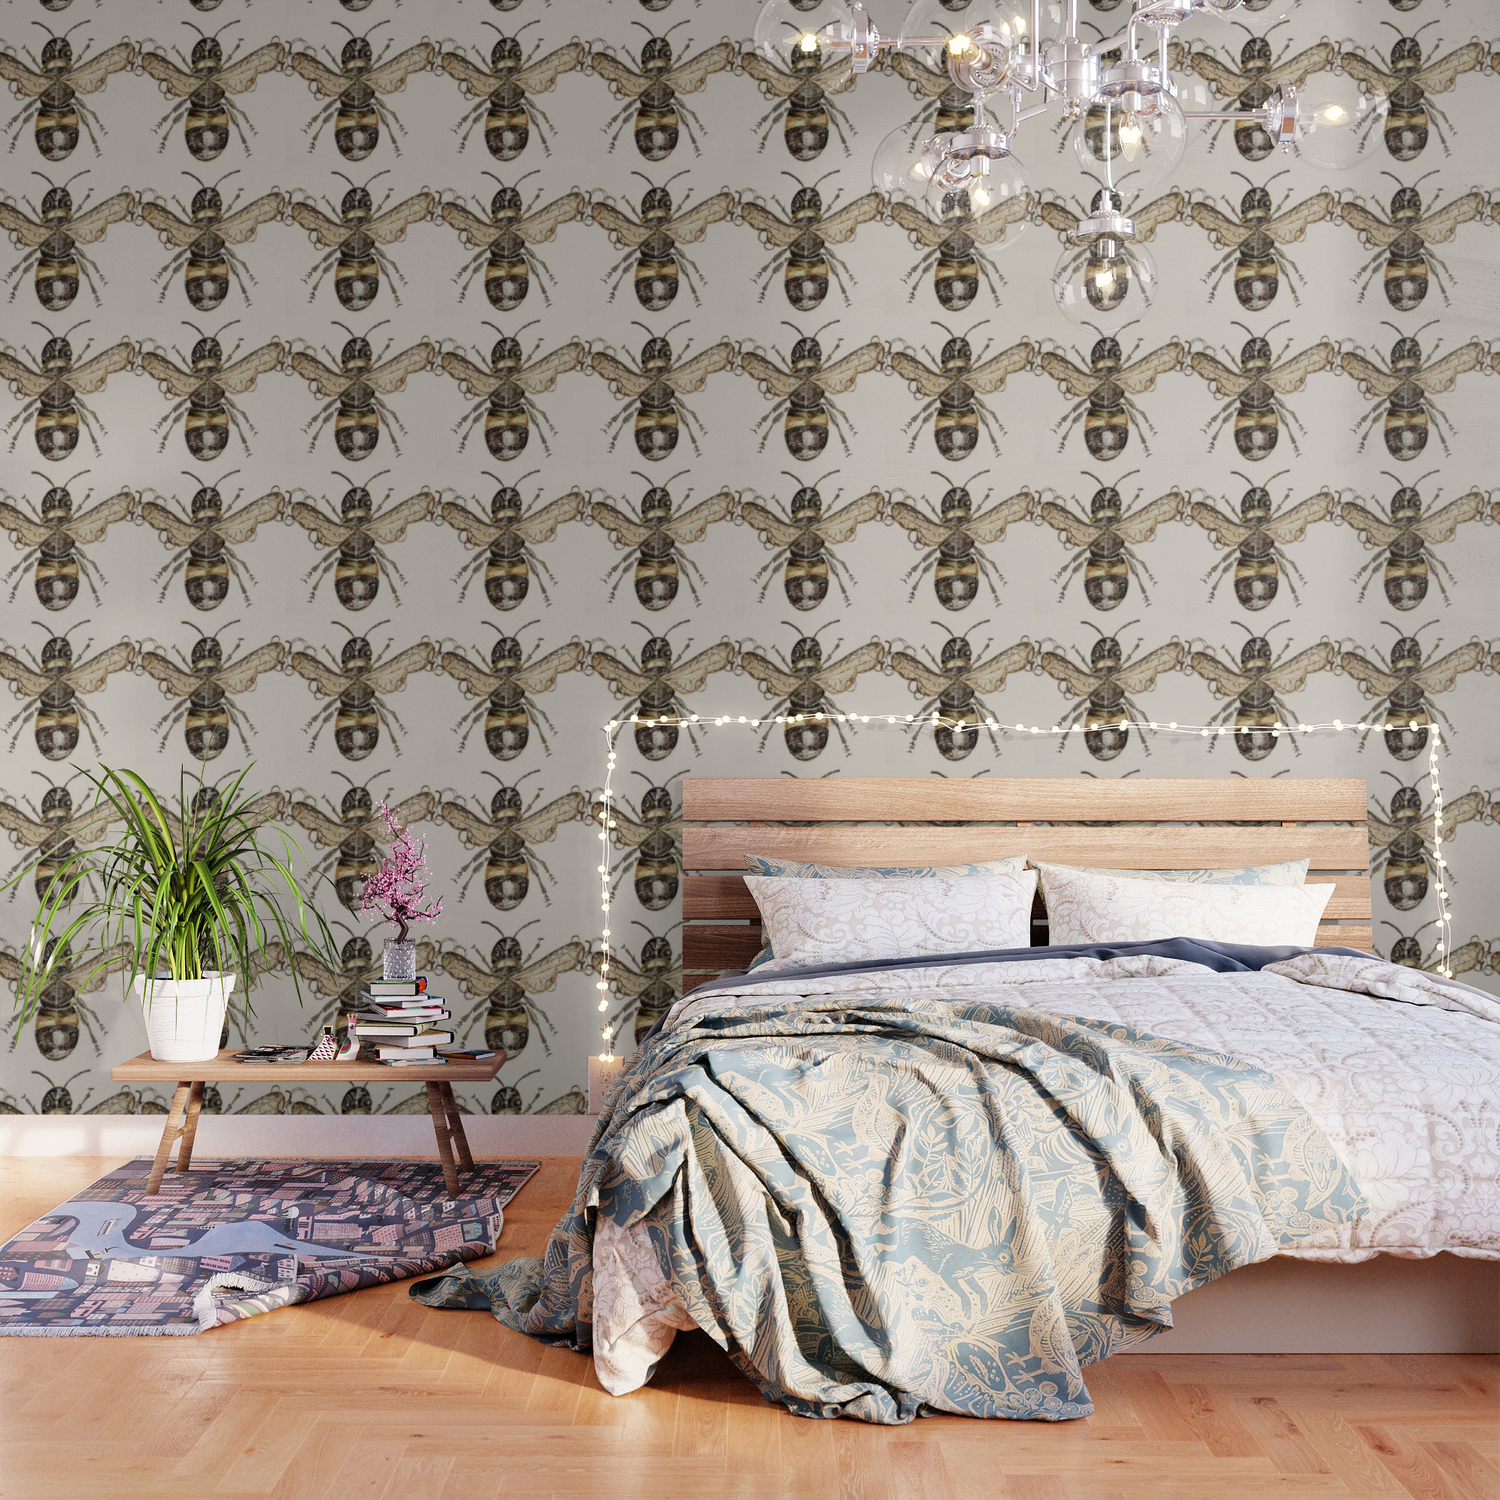 The Elizabethan Bee Wallpaper By Lillilycotton Society6